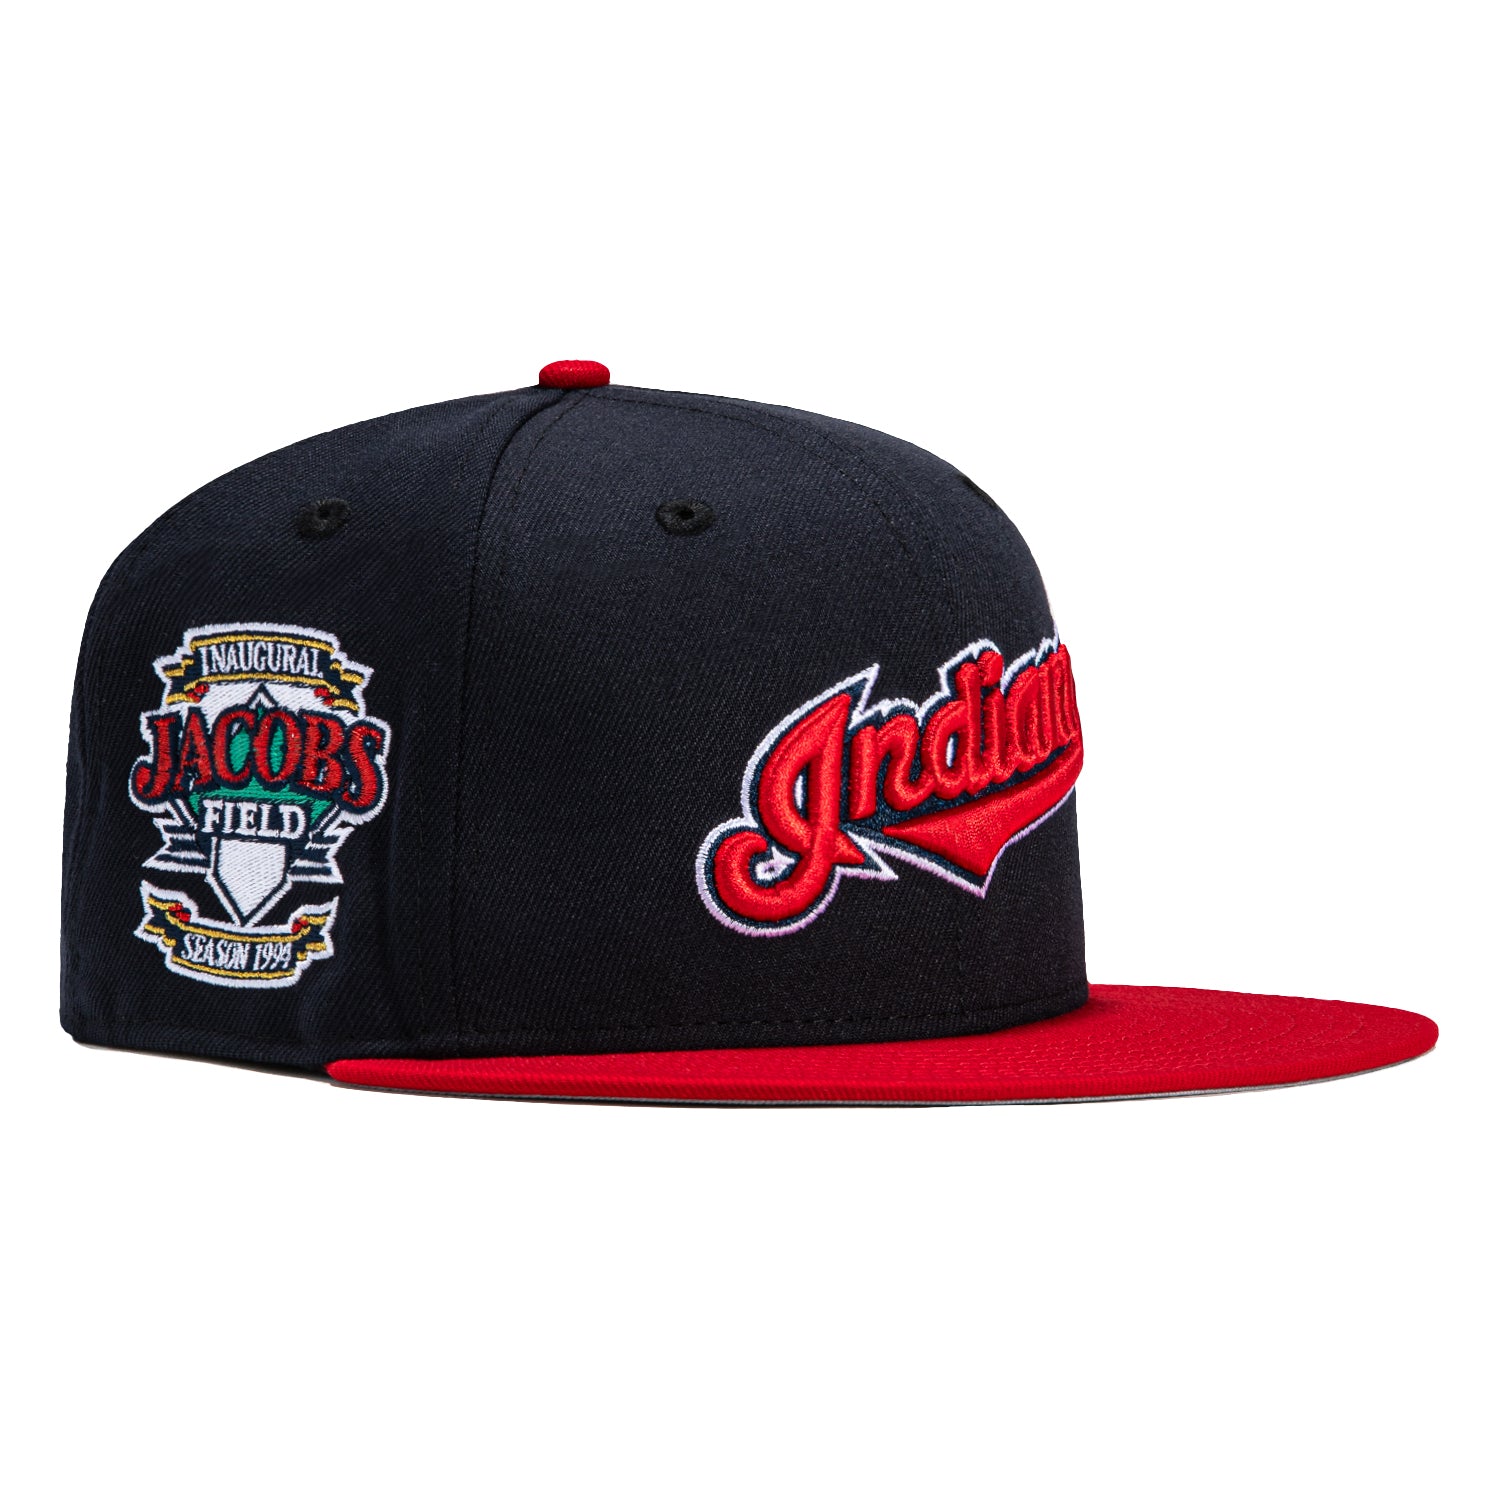 New Era 59Fifty Cleveland Guardians Inaugural Jacobs Field Patch